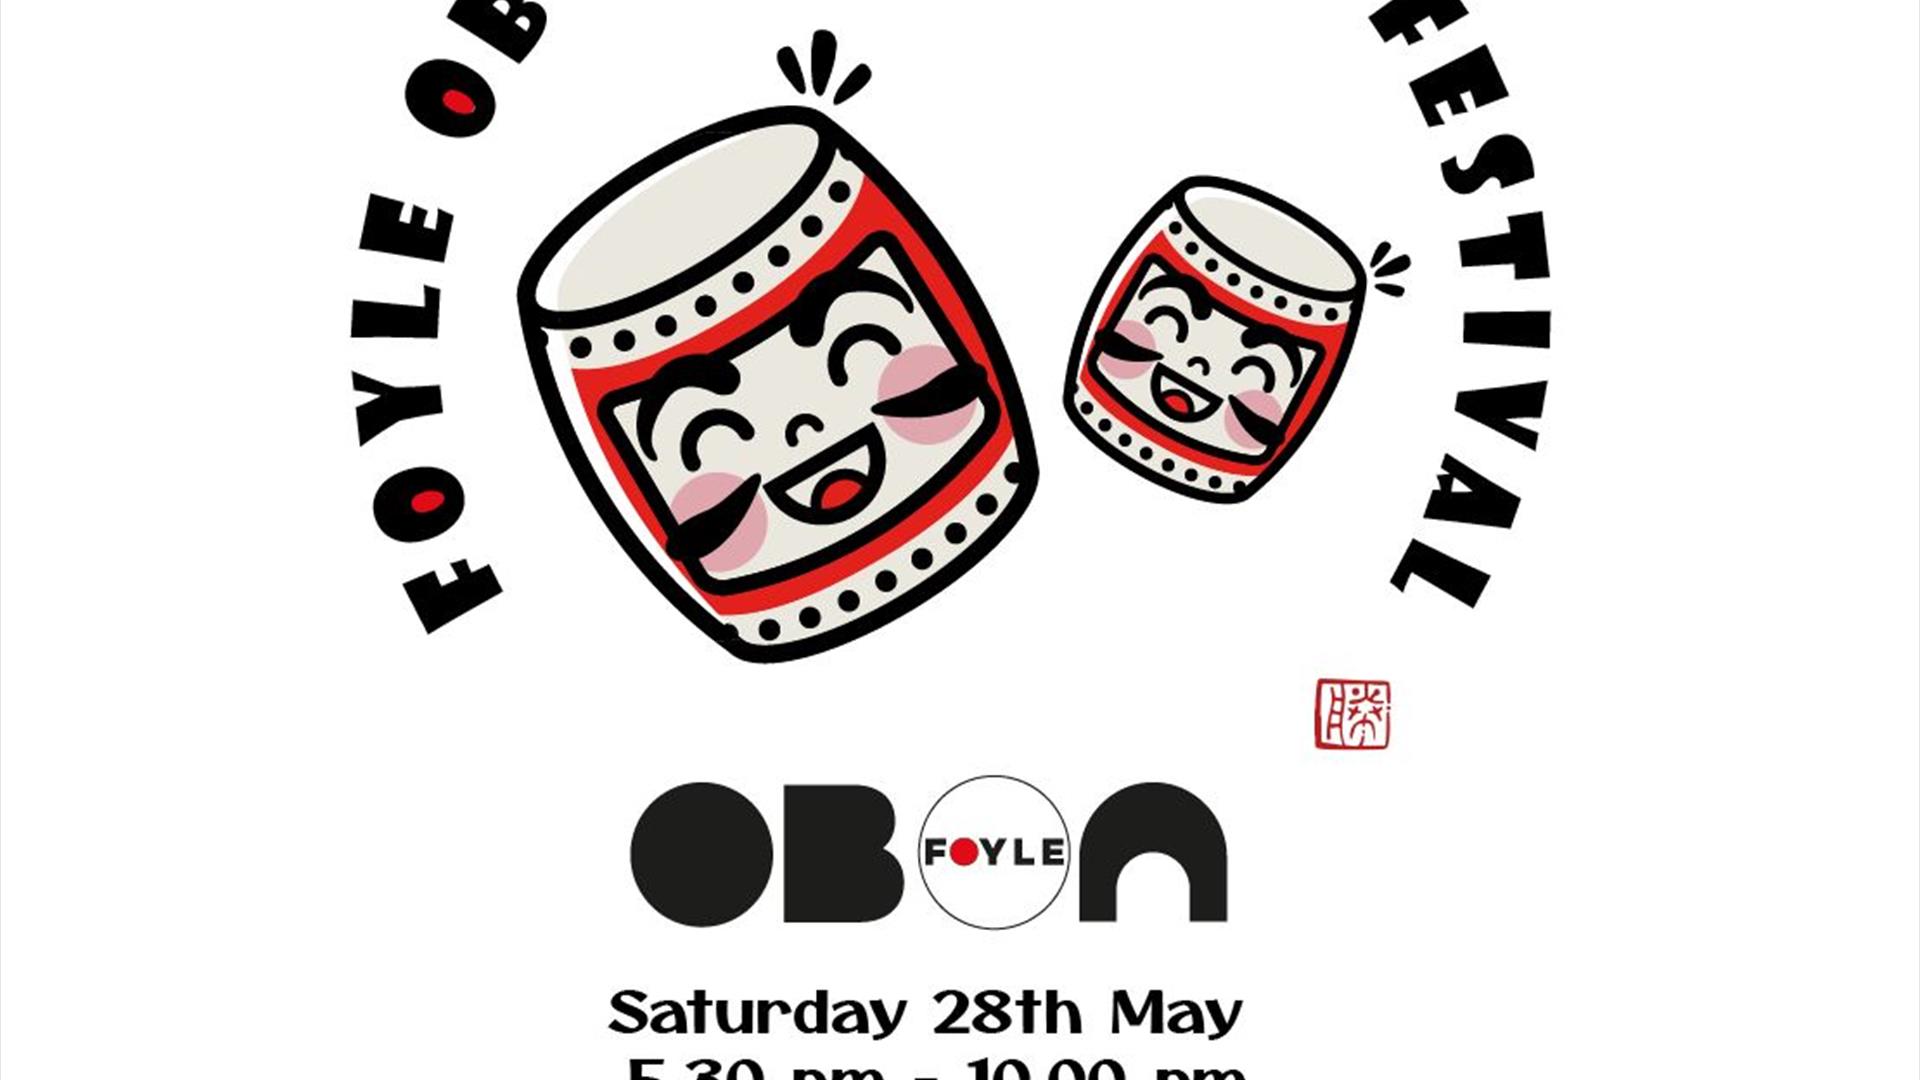 This image contains details of the Foyle Obon Japanese Festival taking place on Saturday 28th May from 5.30pm at The Playtrail.